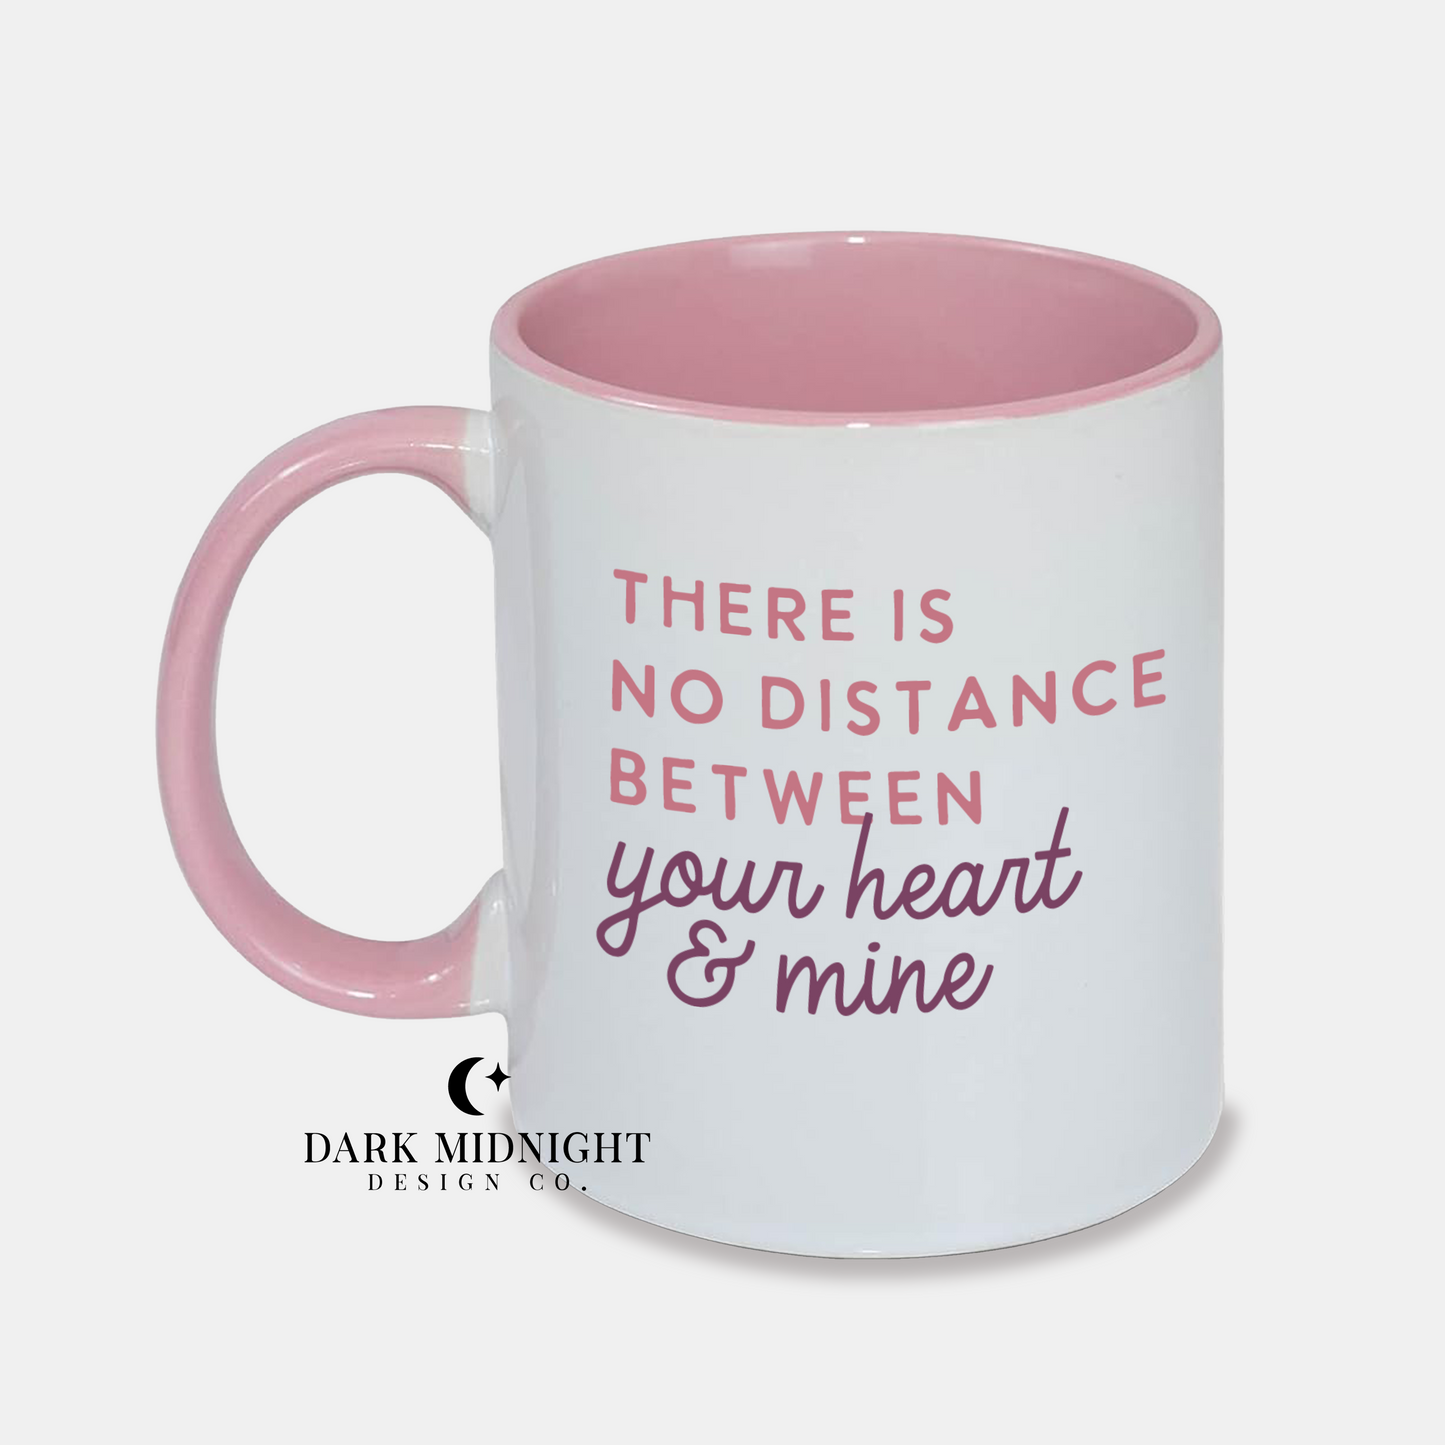 There Is No Distance Between Your Heart and Mine 15oz Mug - Officially Licensed Sullivan Family Series